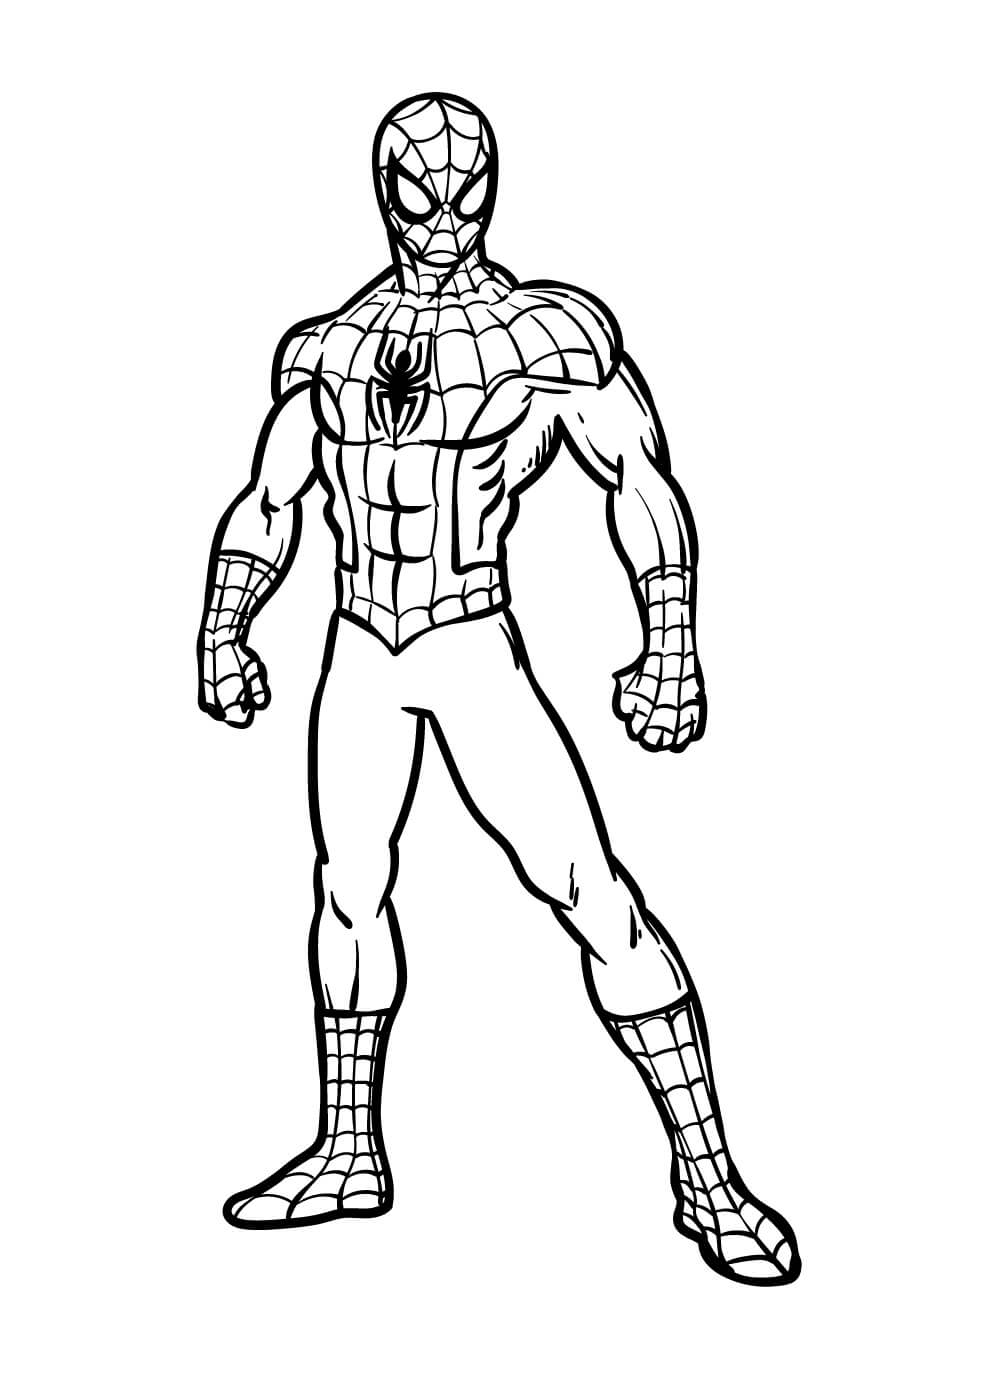 Basic spiderman coloring page